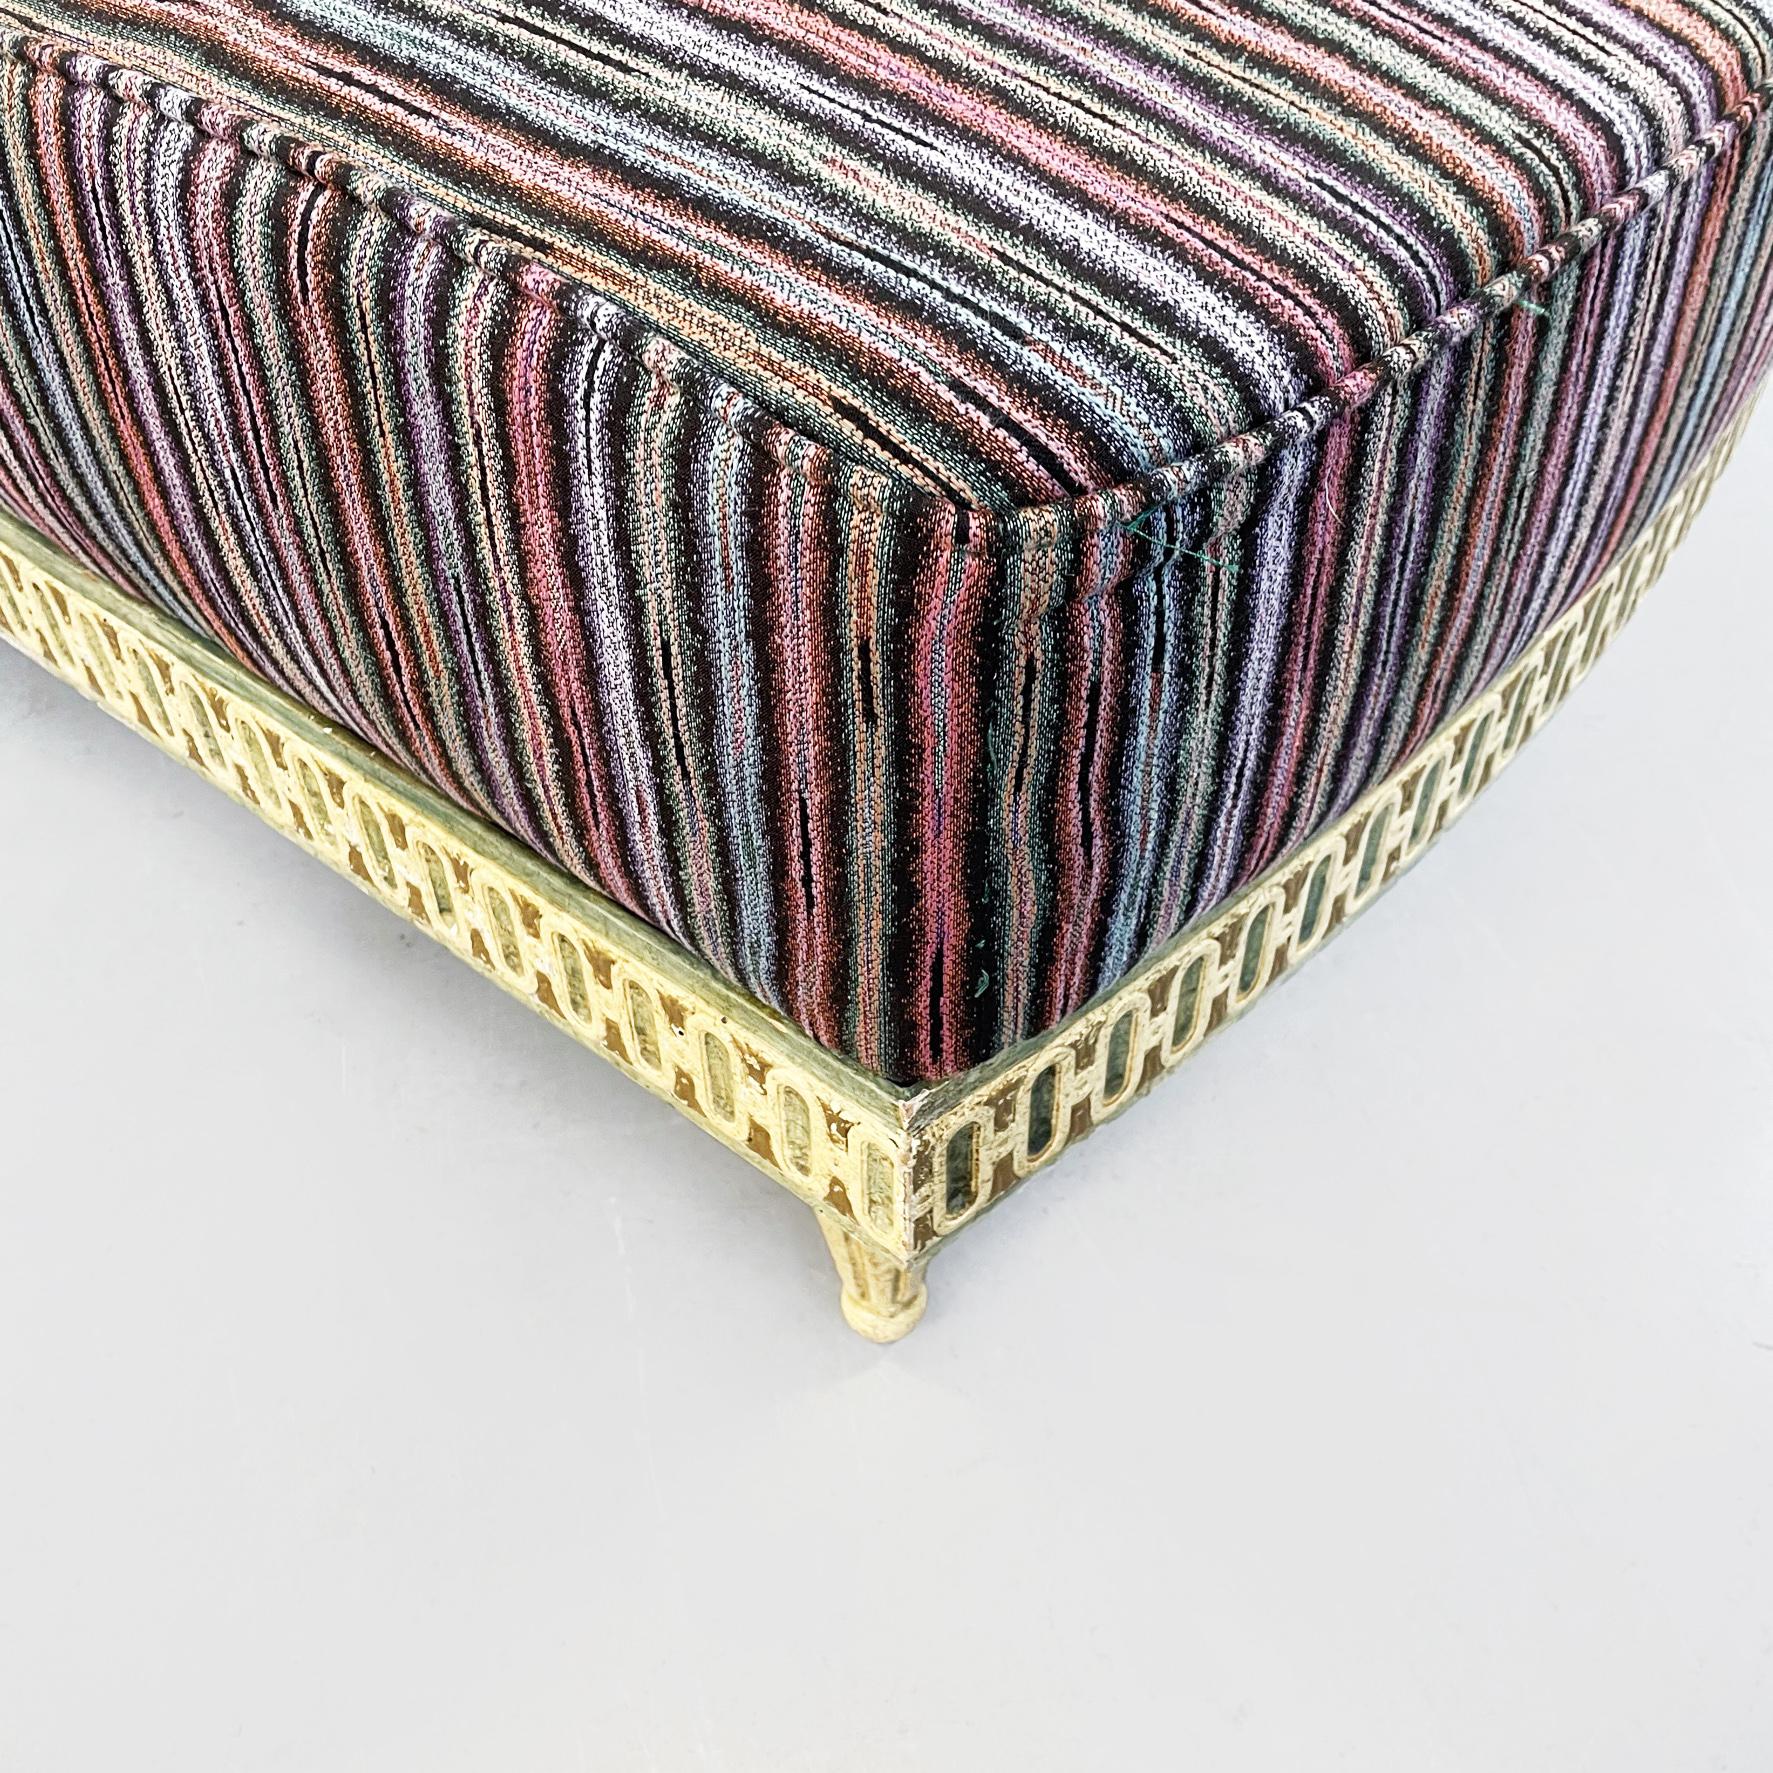 Italian Midcentury Venetian Style Chaise Longue with Missoni Striped Fabric, 1950 For Sale 7